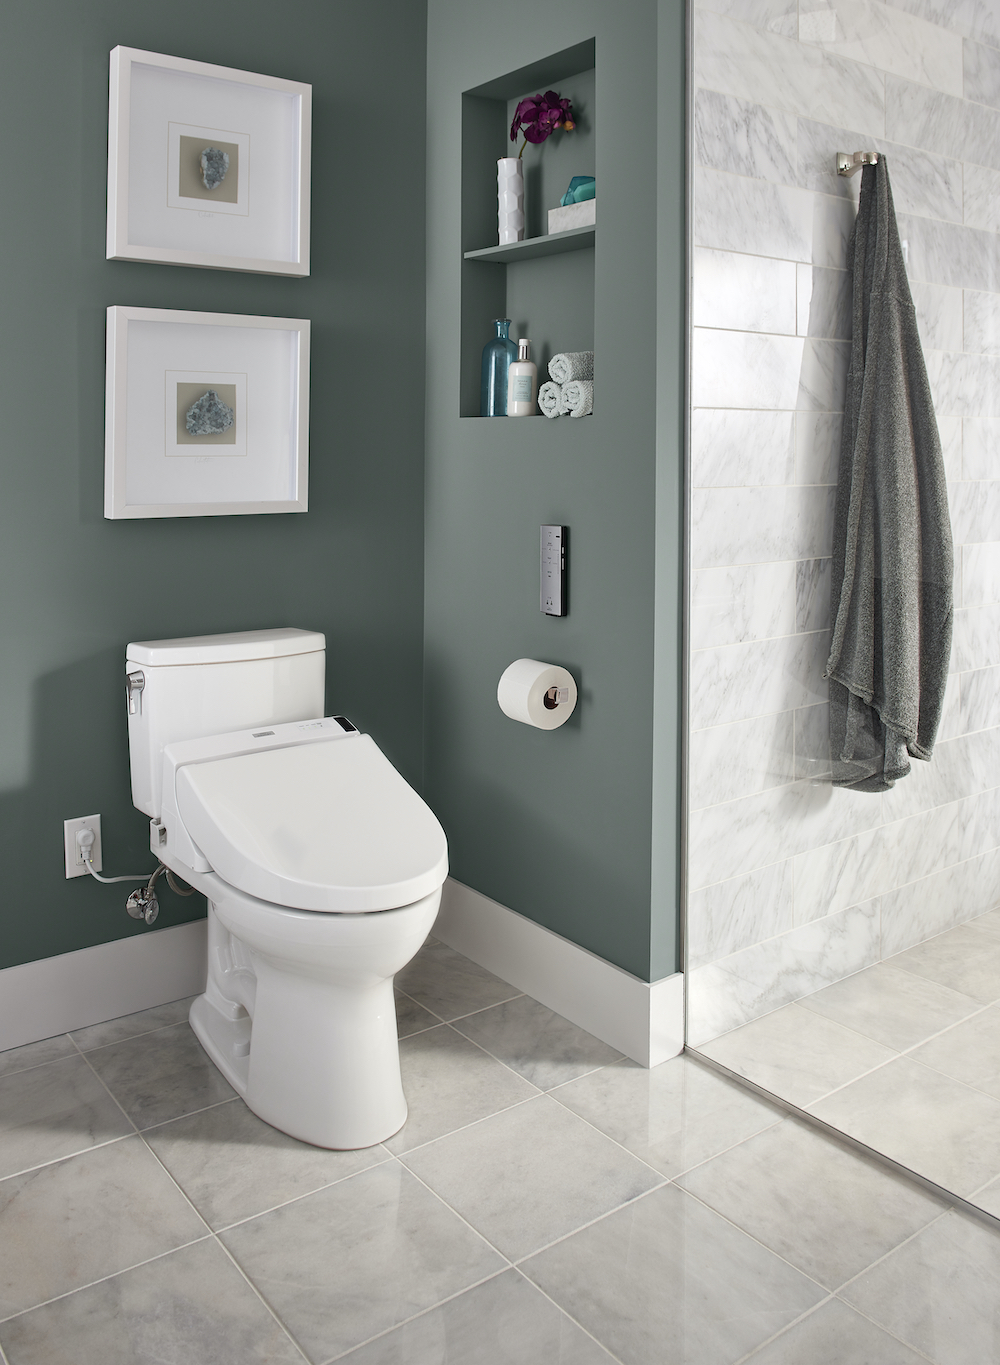 Beautiful bathroom with grey and white tile floors, walk-in shower with grey and white tiles, green grey painted walls, and Toto Washlet® C200 Bidet Toilet Seat with PreMist™, found at Splashes Bath & Kitchen, with two framed paintings above it